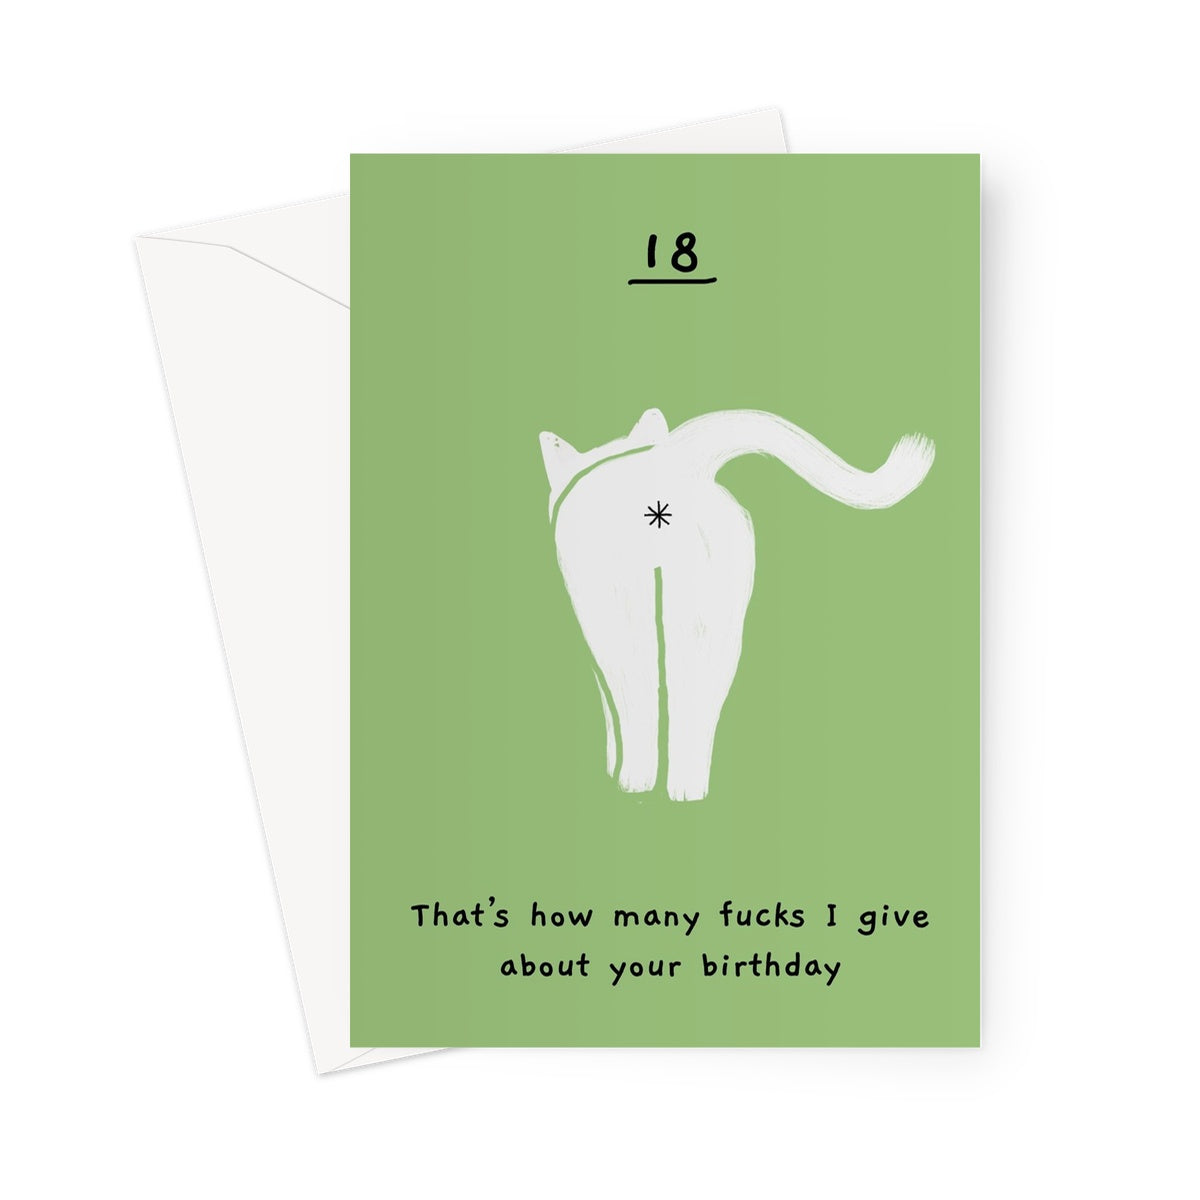 Ken the Cat 18th birthday card - that's how many f*cks I give